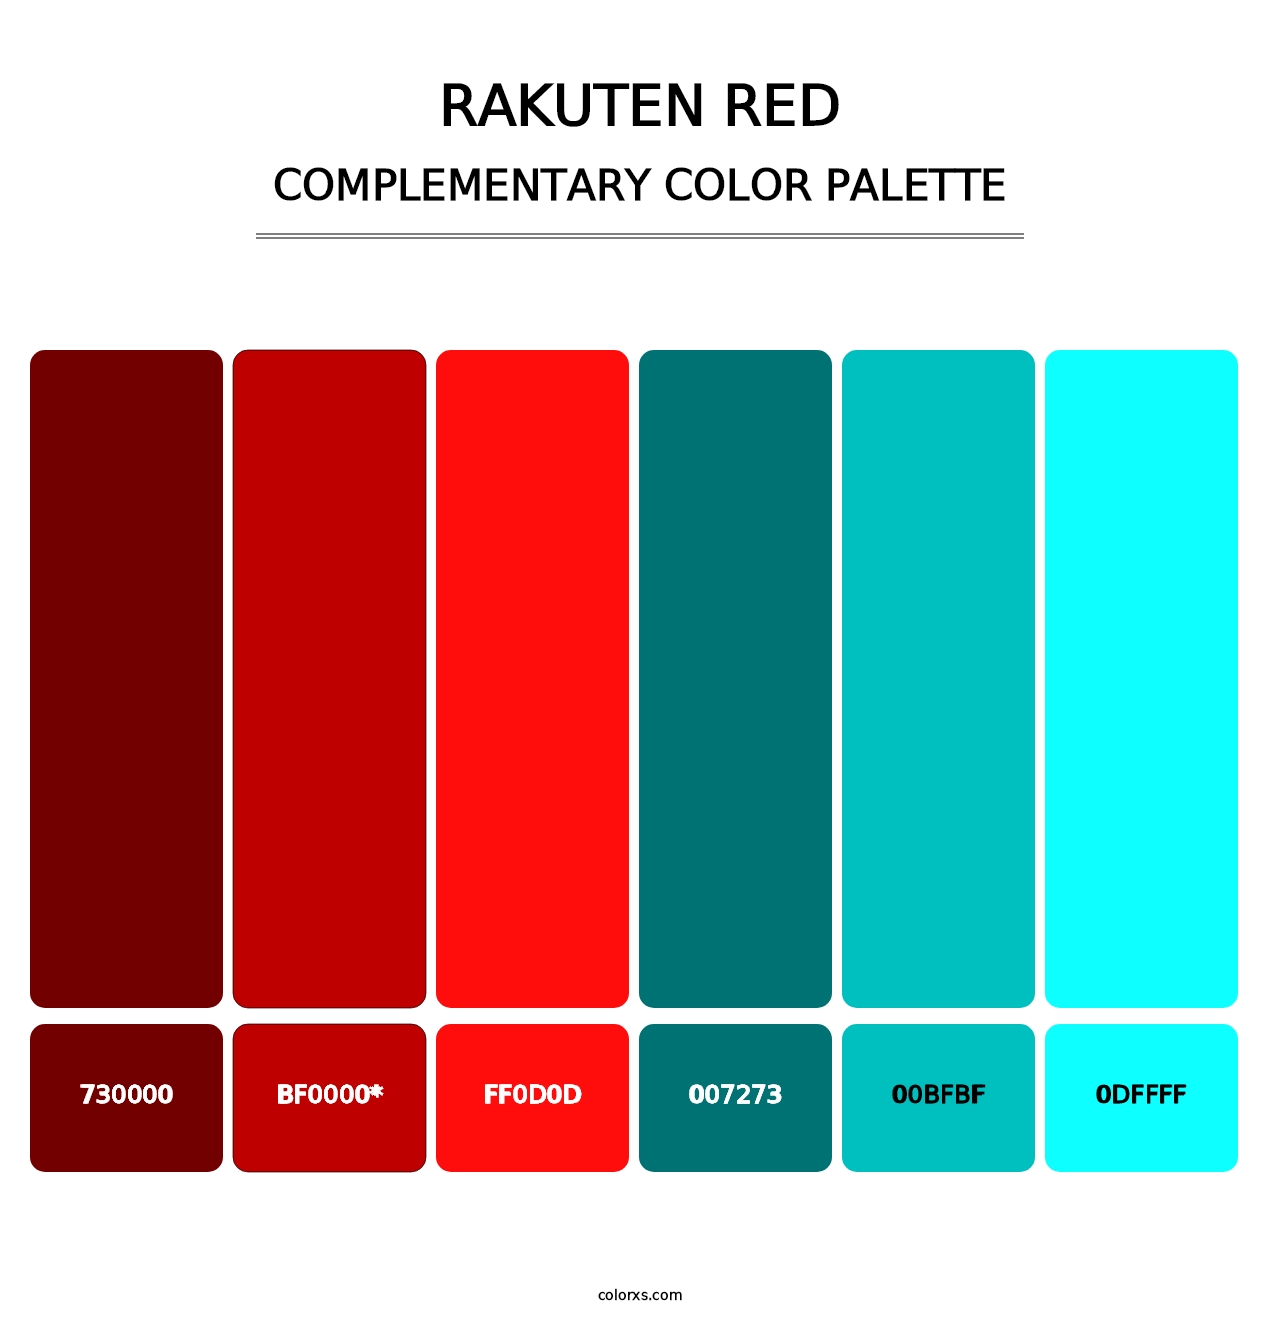 Rakuten Red - Complementary Color Palette